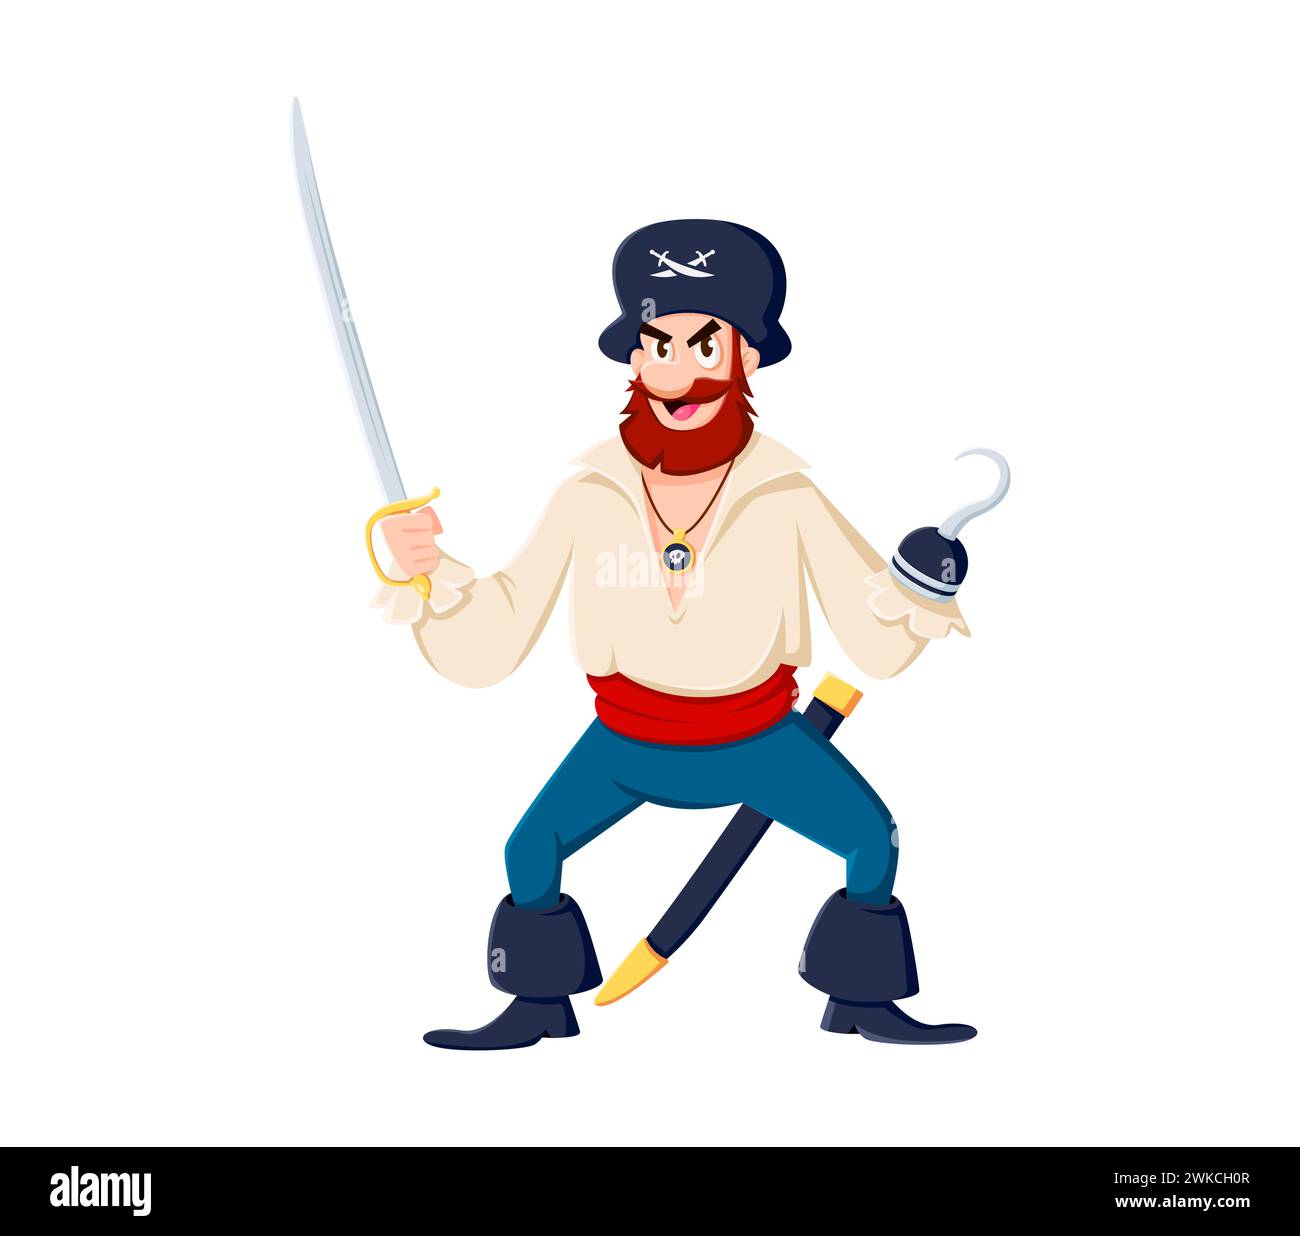 https://c8.alamy.com/comp/2WKCH0R/cartoon-sea-pirate-sailor-and-corsair-captain-character-isolated-vector-lively-filibuster-personage-with-a-sinister-hook-hand-and-saber-wearing-a-tricorn-hat-ready-for-adventures-on-the-high-seas-2WKCH0R.jpg